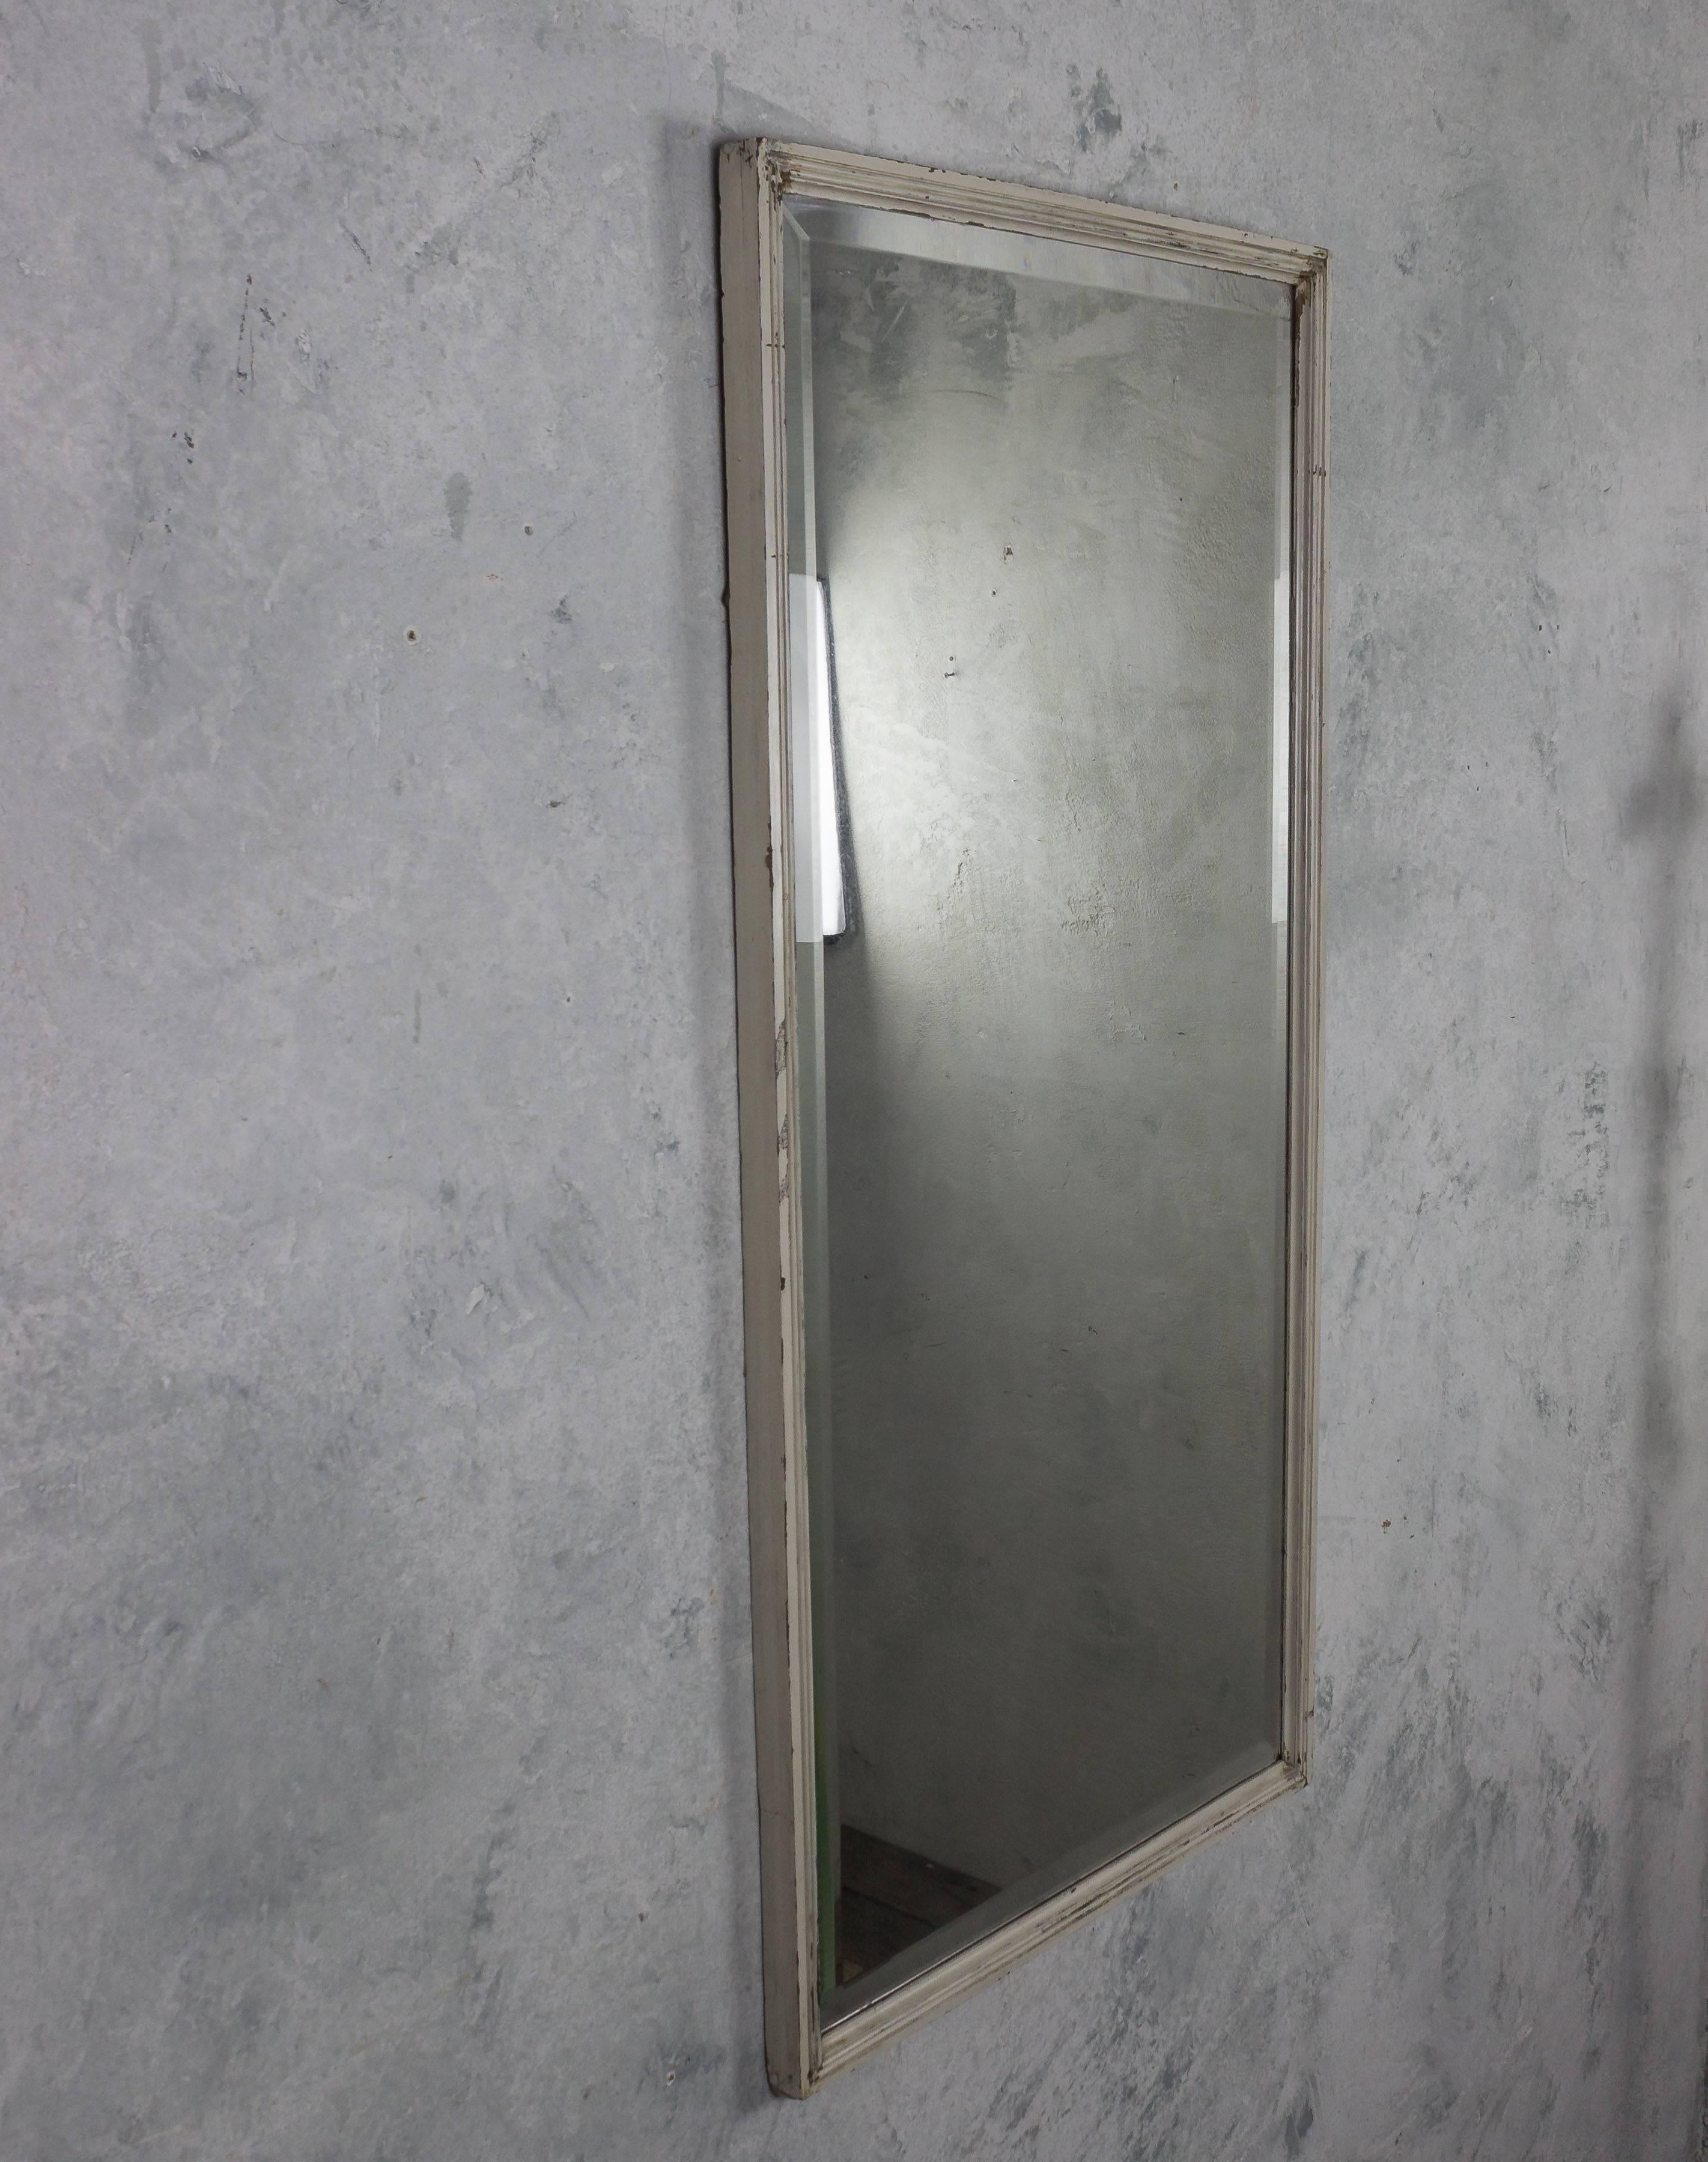 French early 20th century beveled mirror with a narrow white fluted frame. Vintage, mirror is heavily distressed.

Ref #: DM0310-01

Dimensions: 47.5”H x 23.5